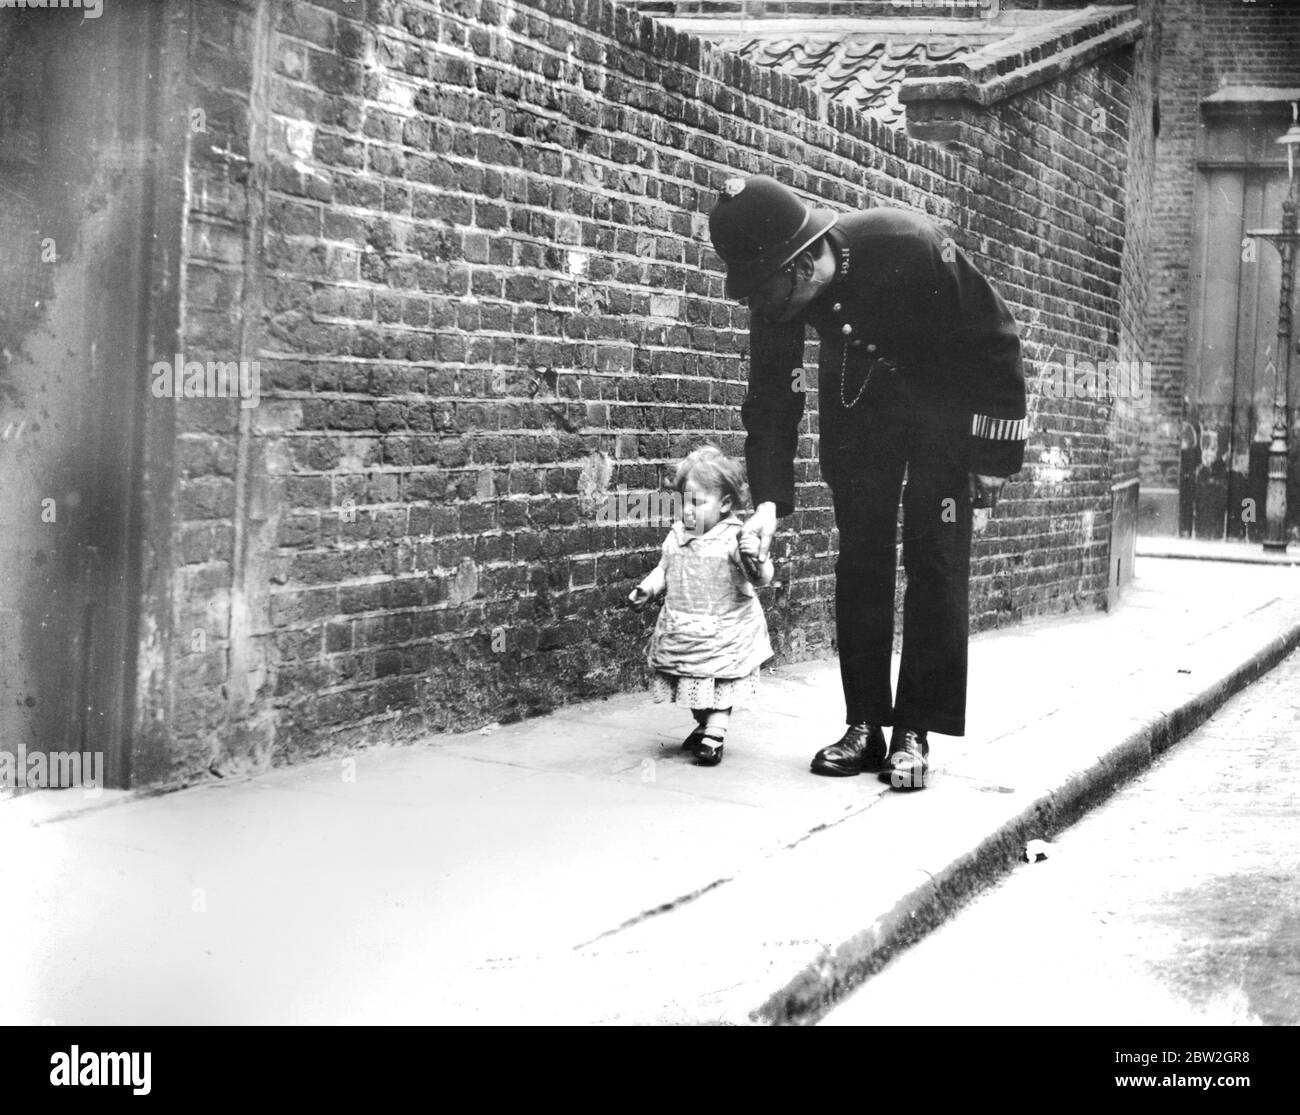 Children and toddlers played in the street, even a child of this age could be allowed to play outside wander off and come back with the care of the policeman on the beat. Stock Photo